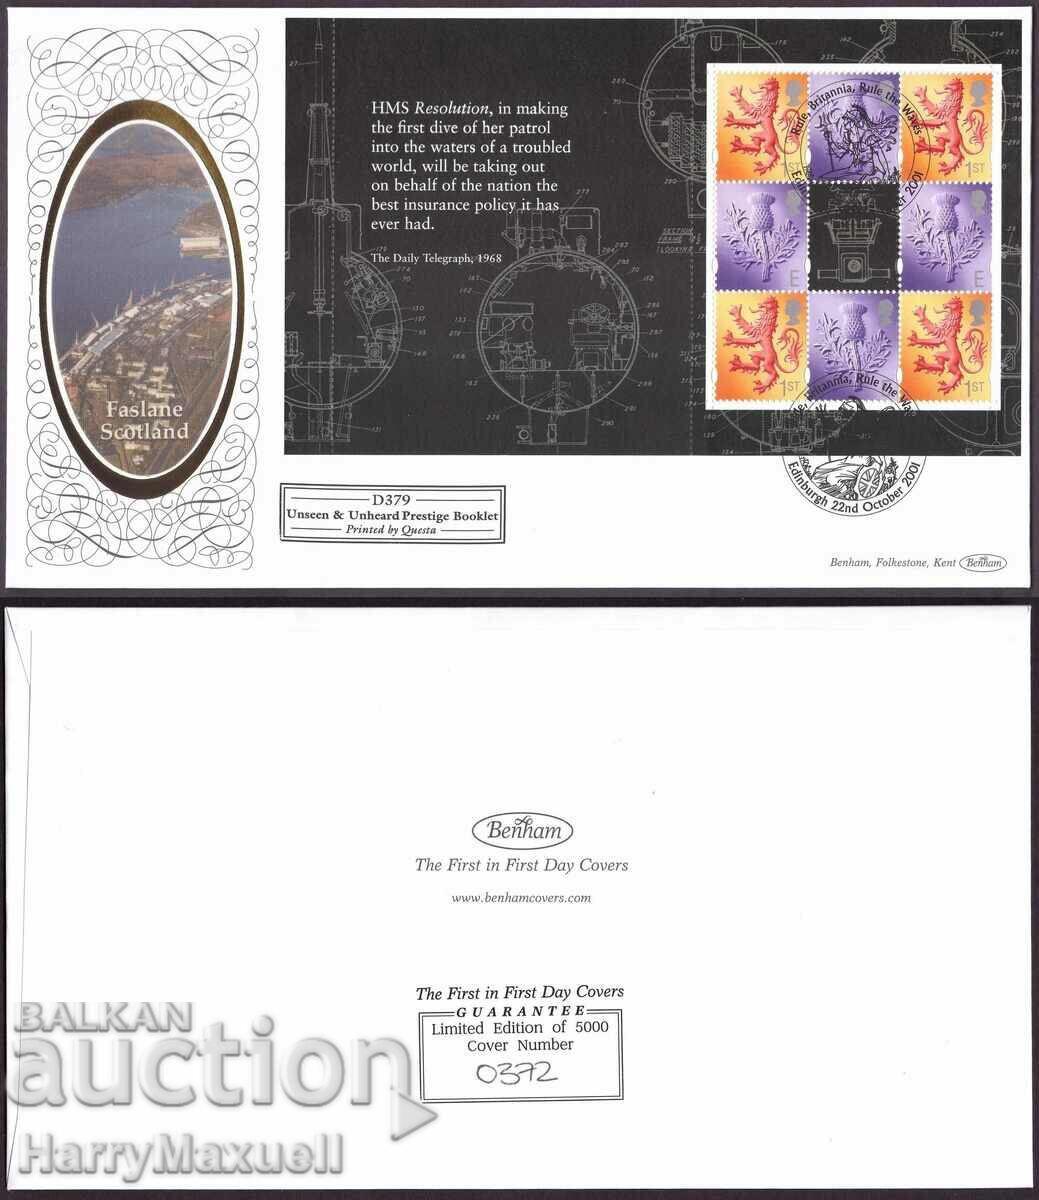 FDC First Day Envelope (FDC) Great Britain 2001. Ship